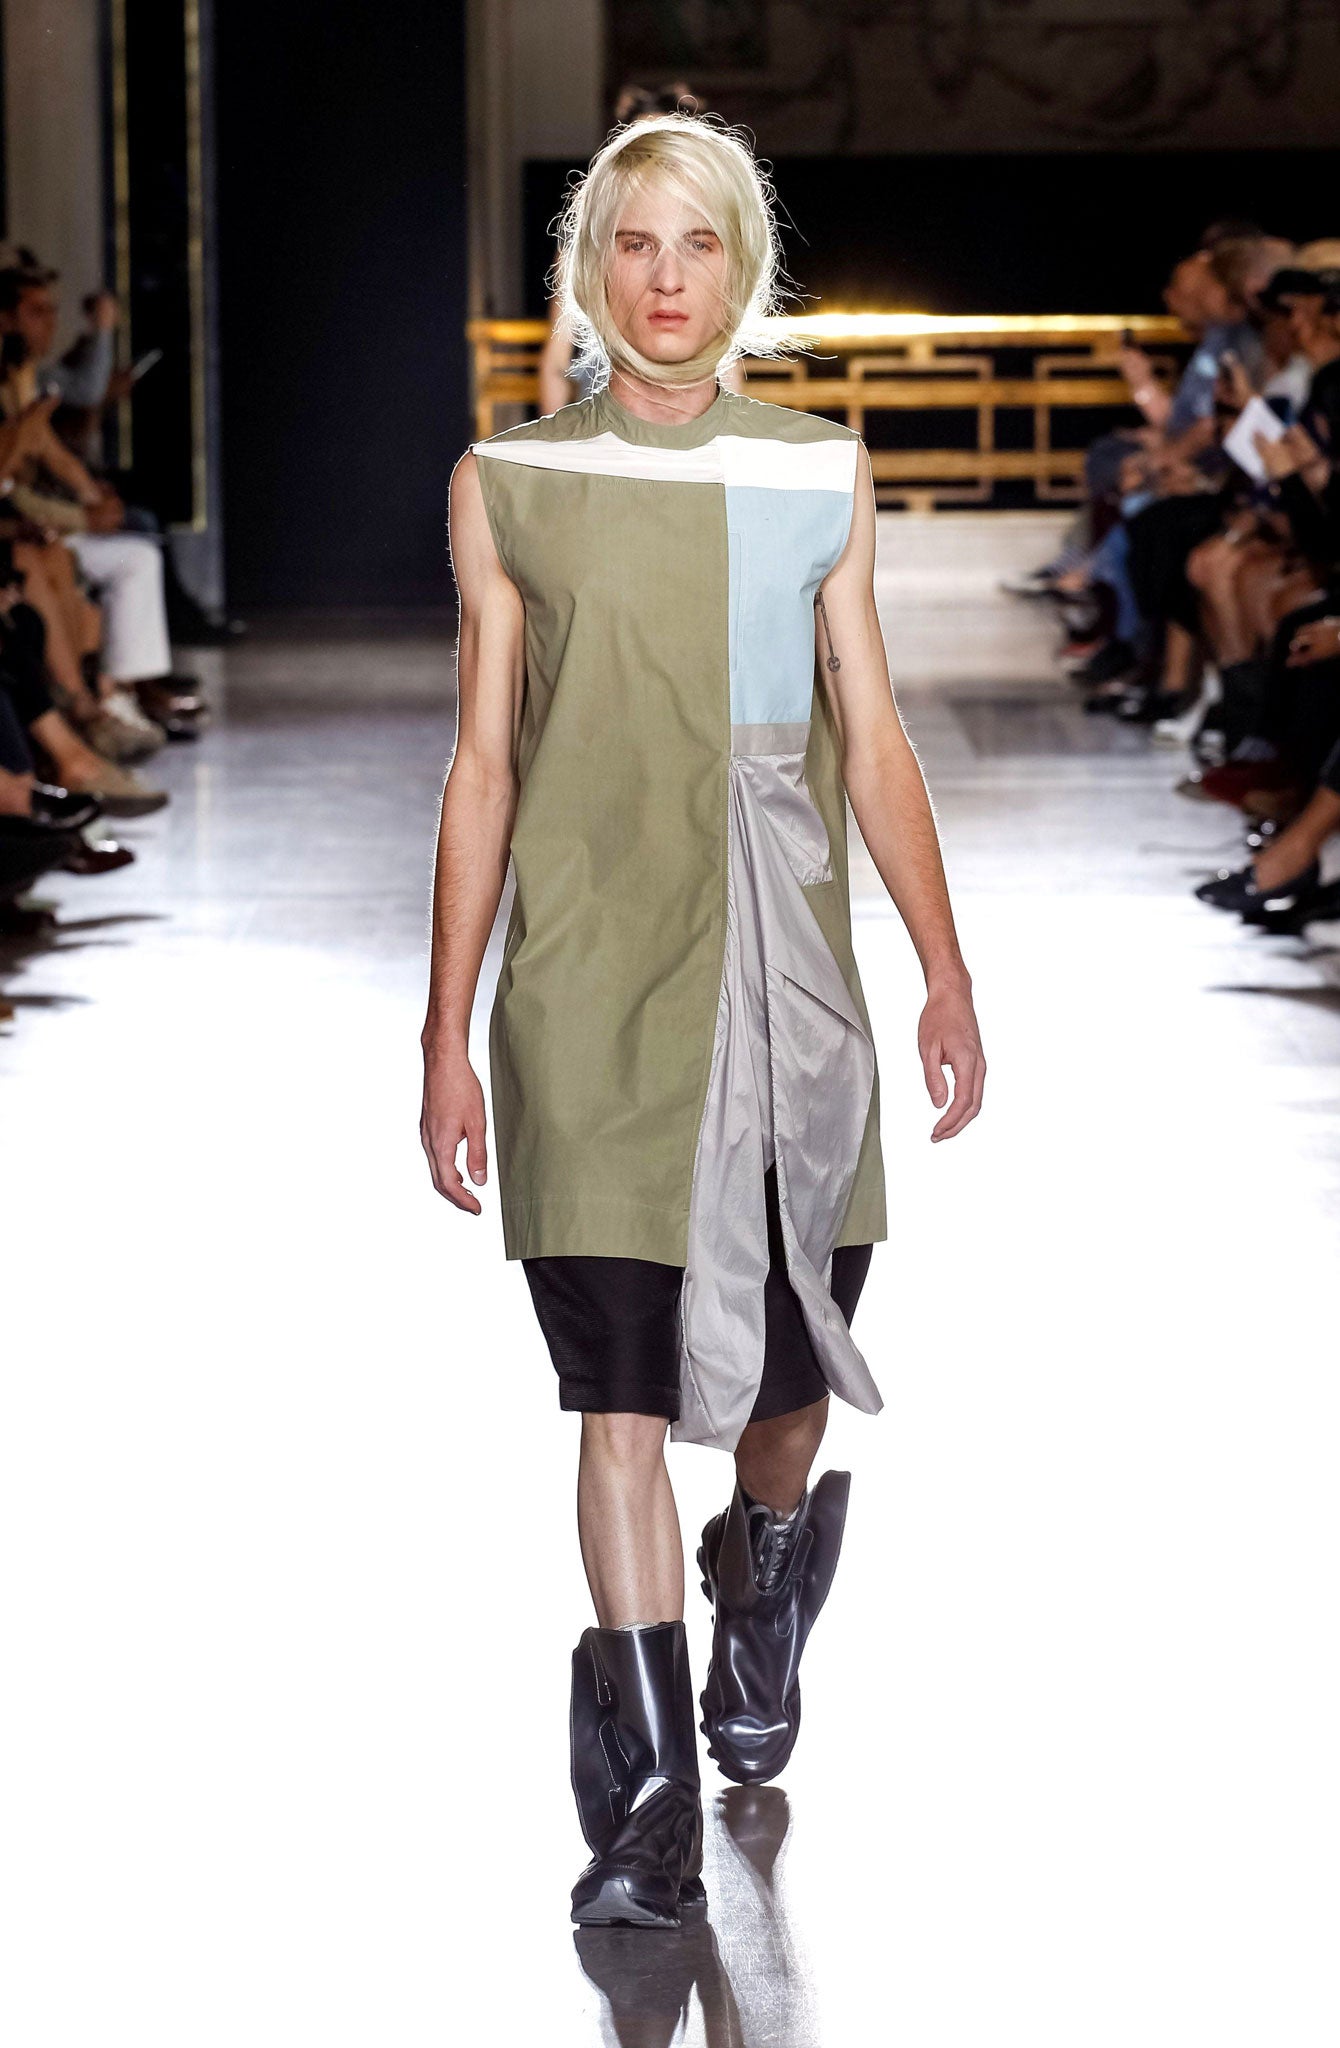 Owens' men frequently wear dresses - on the catwalk and on the street